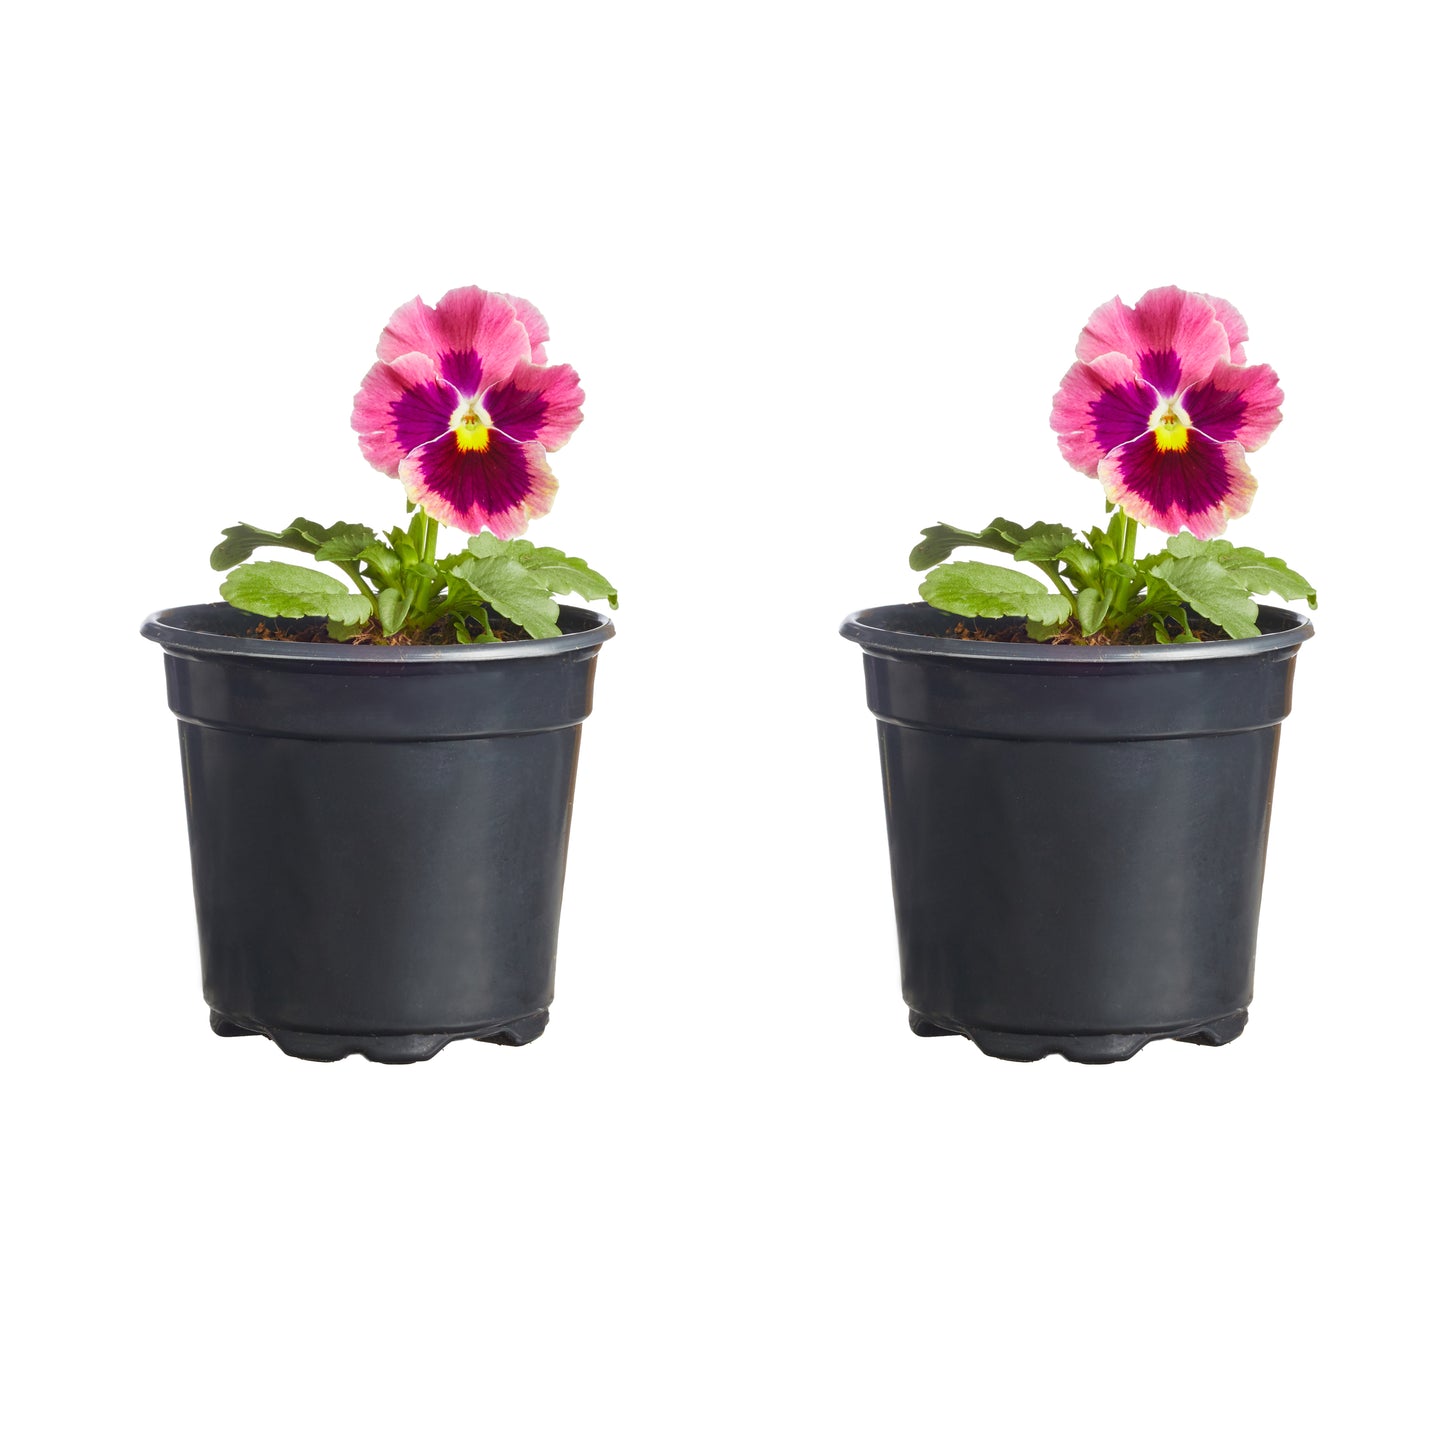 Pansy Delta Classic Apple Cider Mix Plantlings Plus Live Baby Plants 4in. Pot, 2-Pack